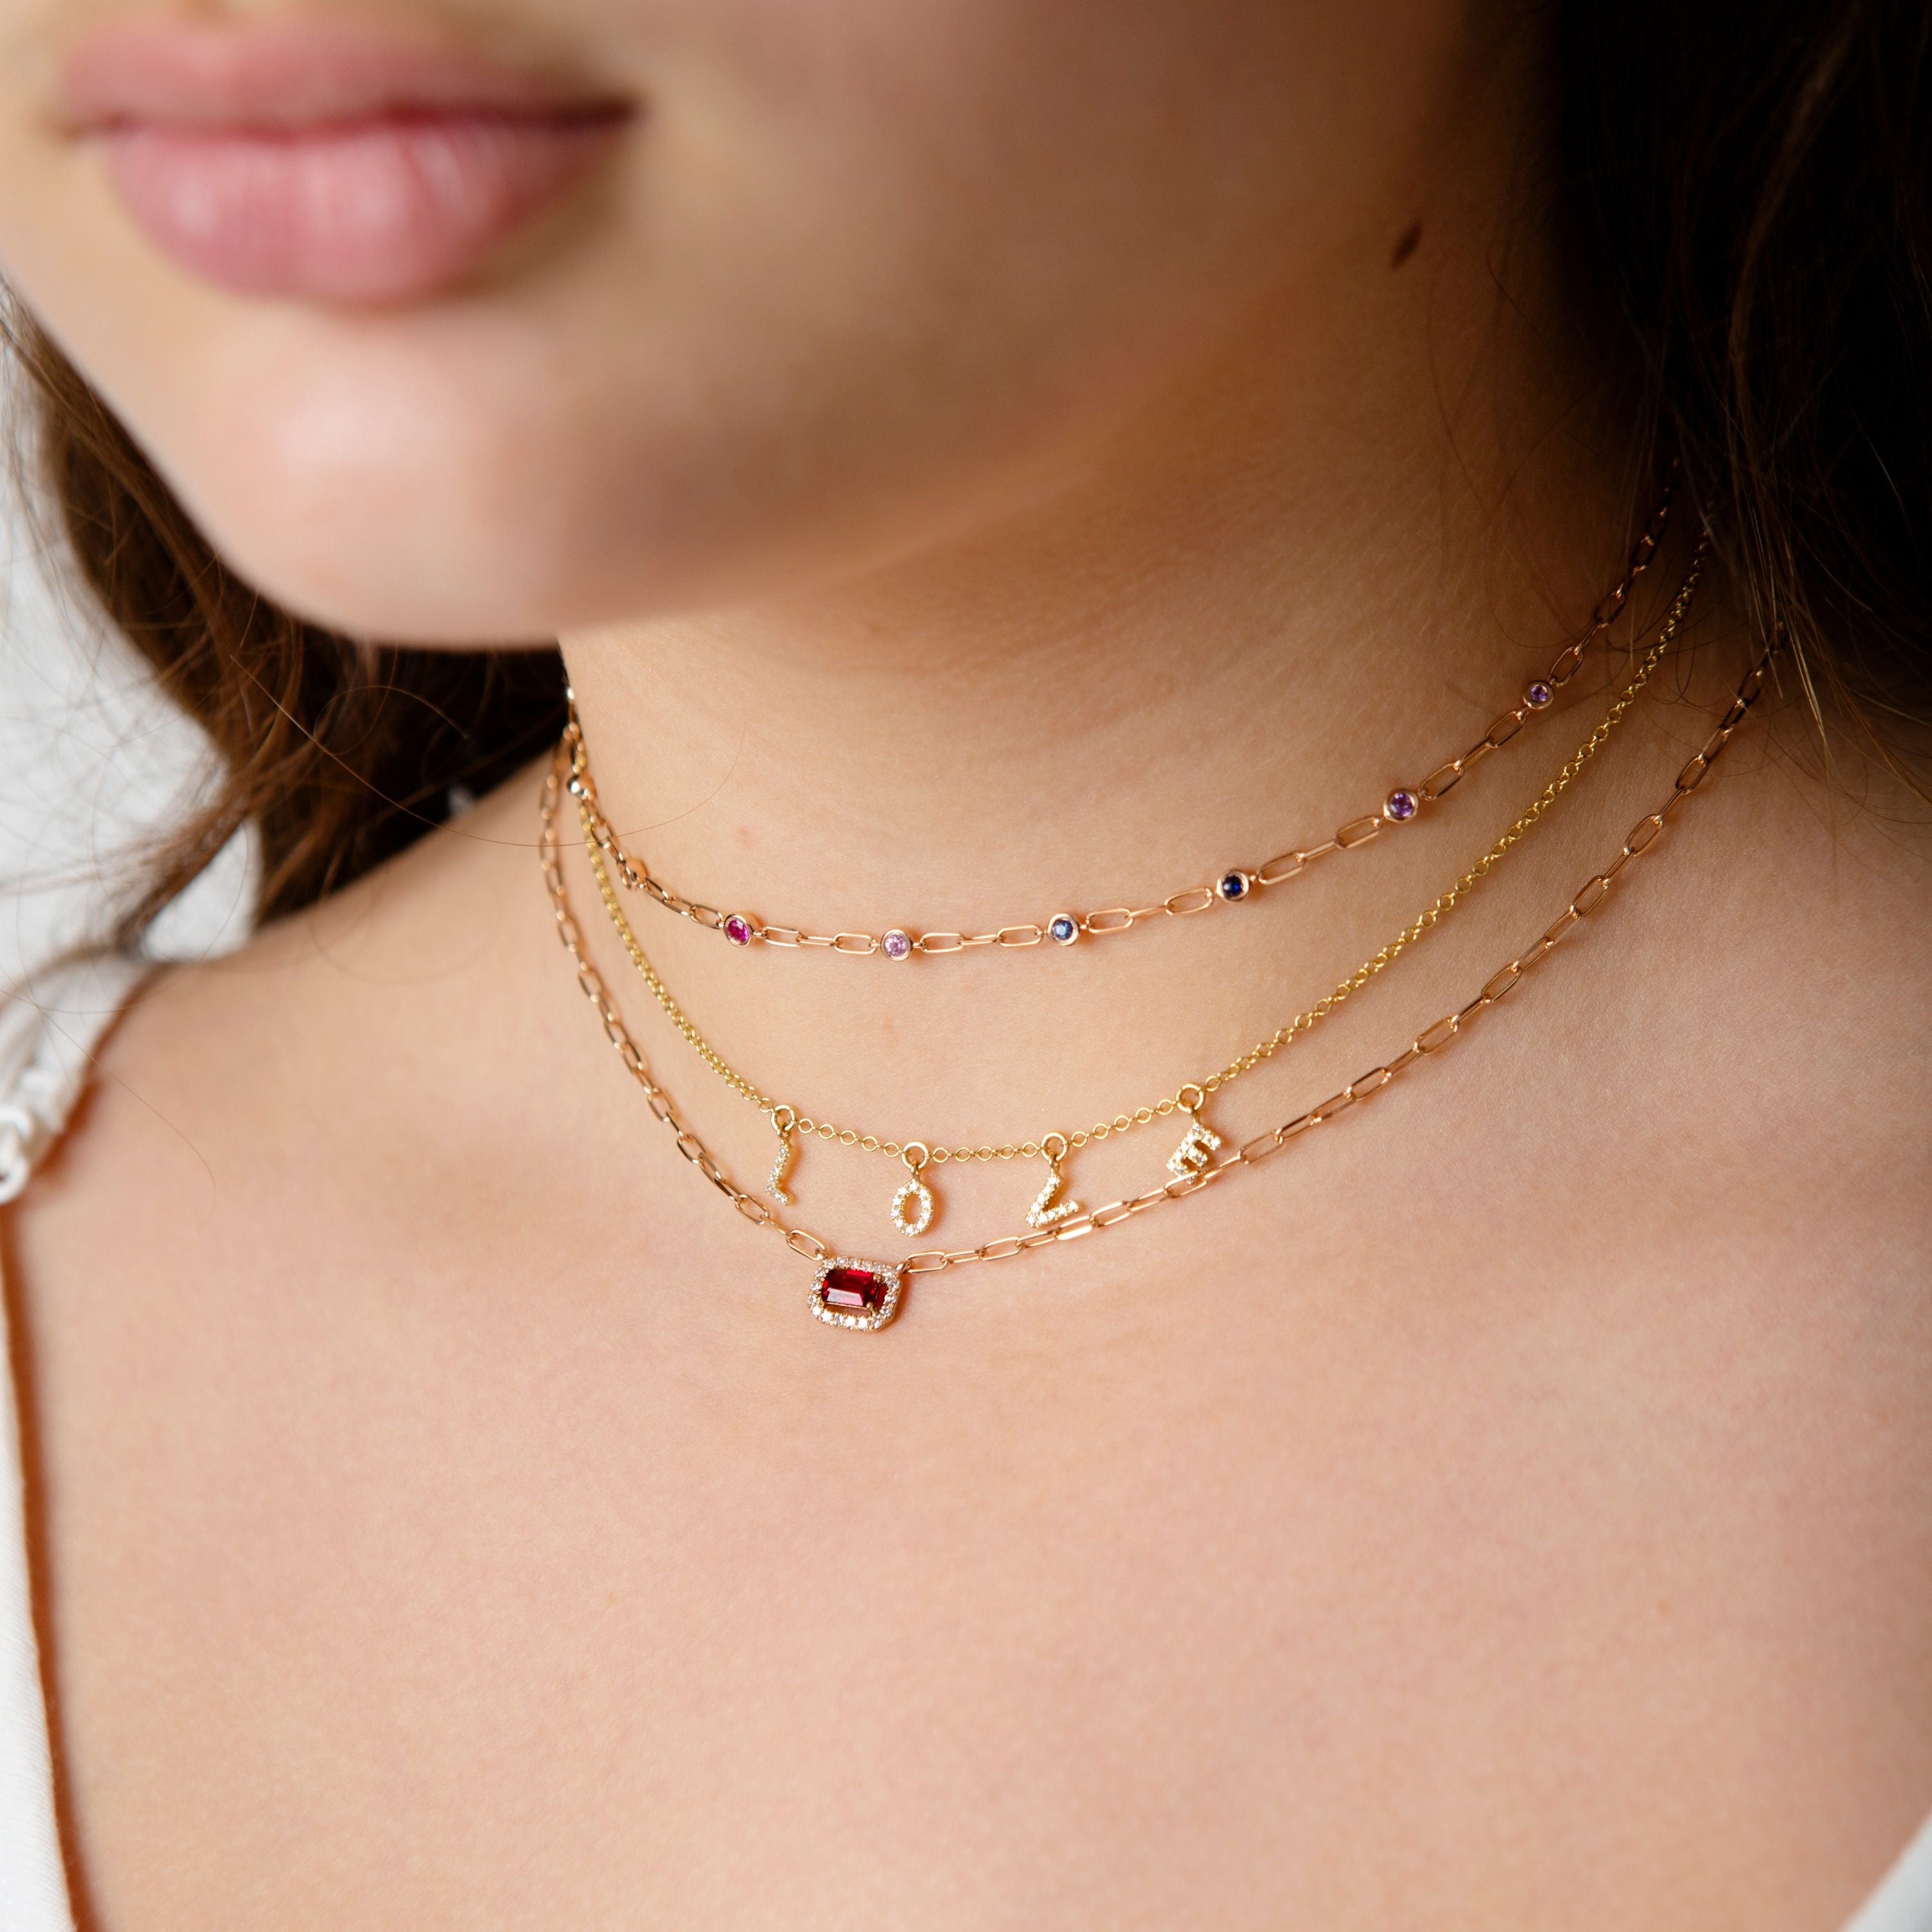 Lola Rose Quentin Beaded Adjustable Necklace - QVC.com